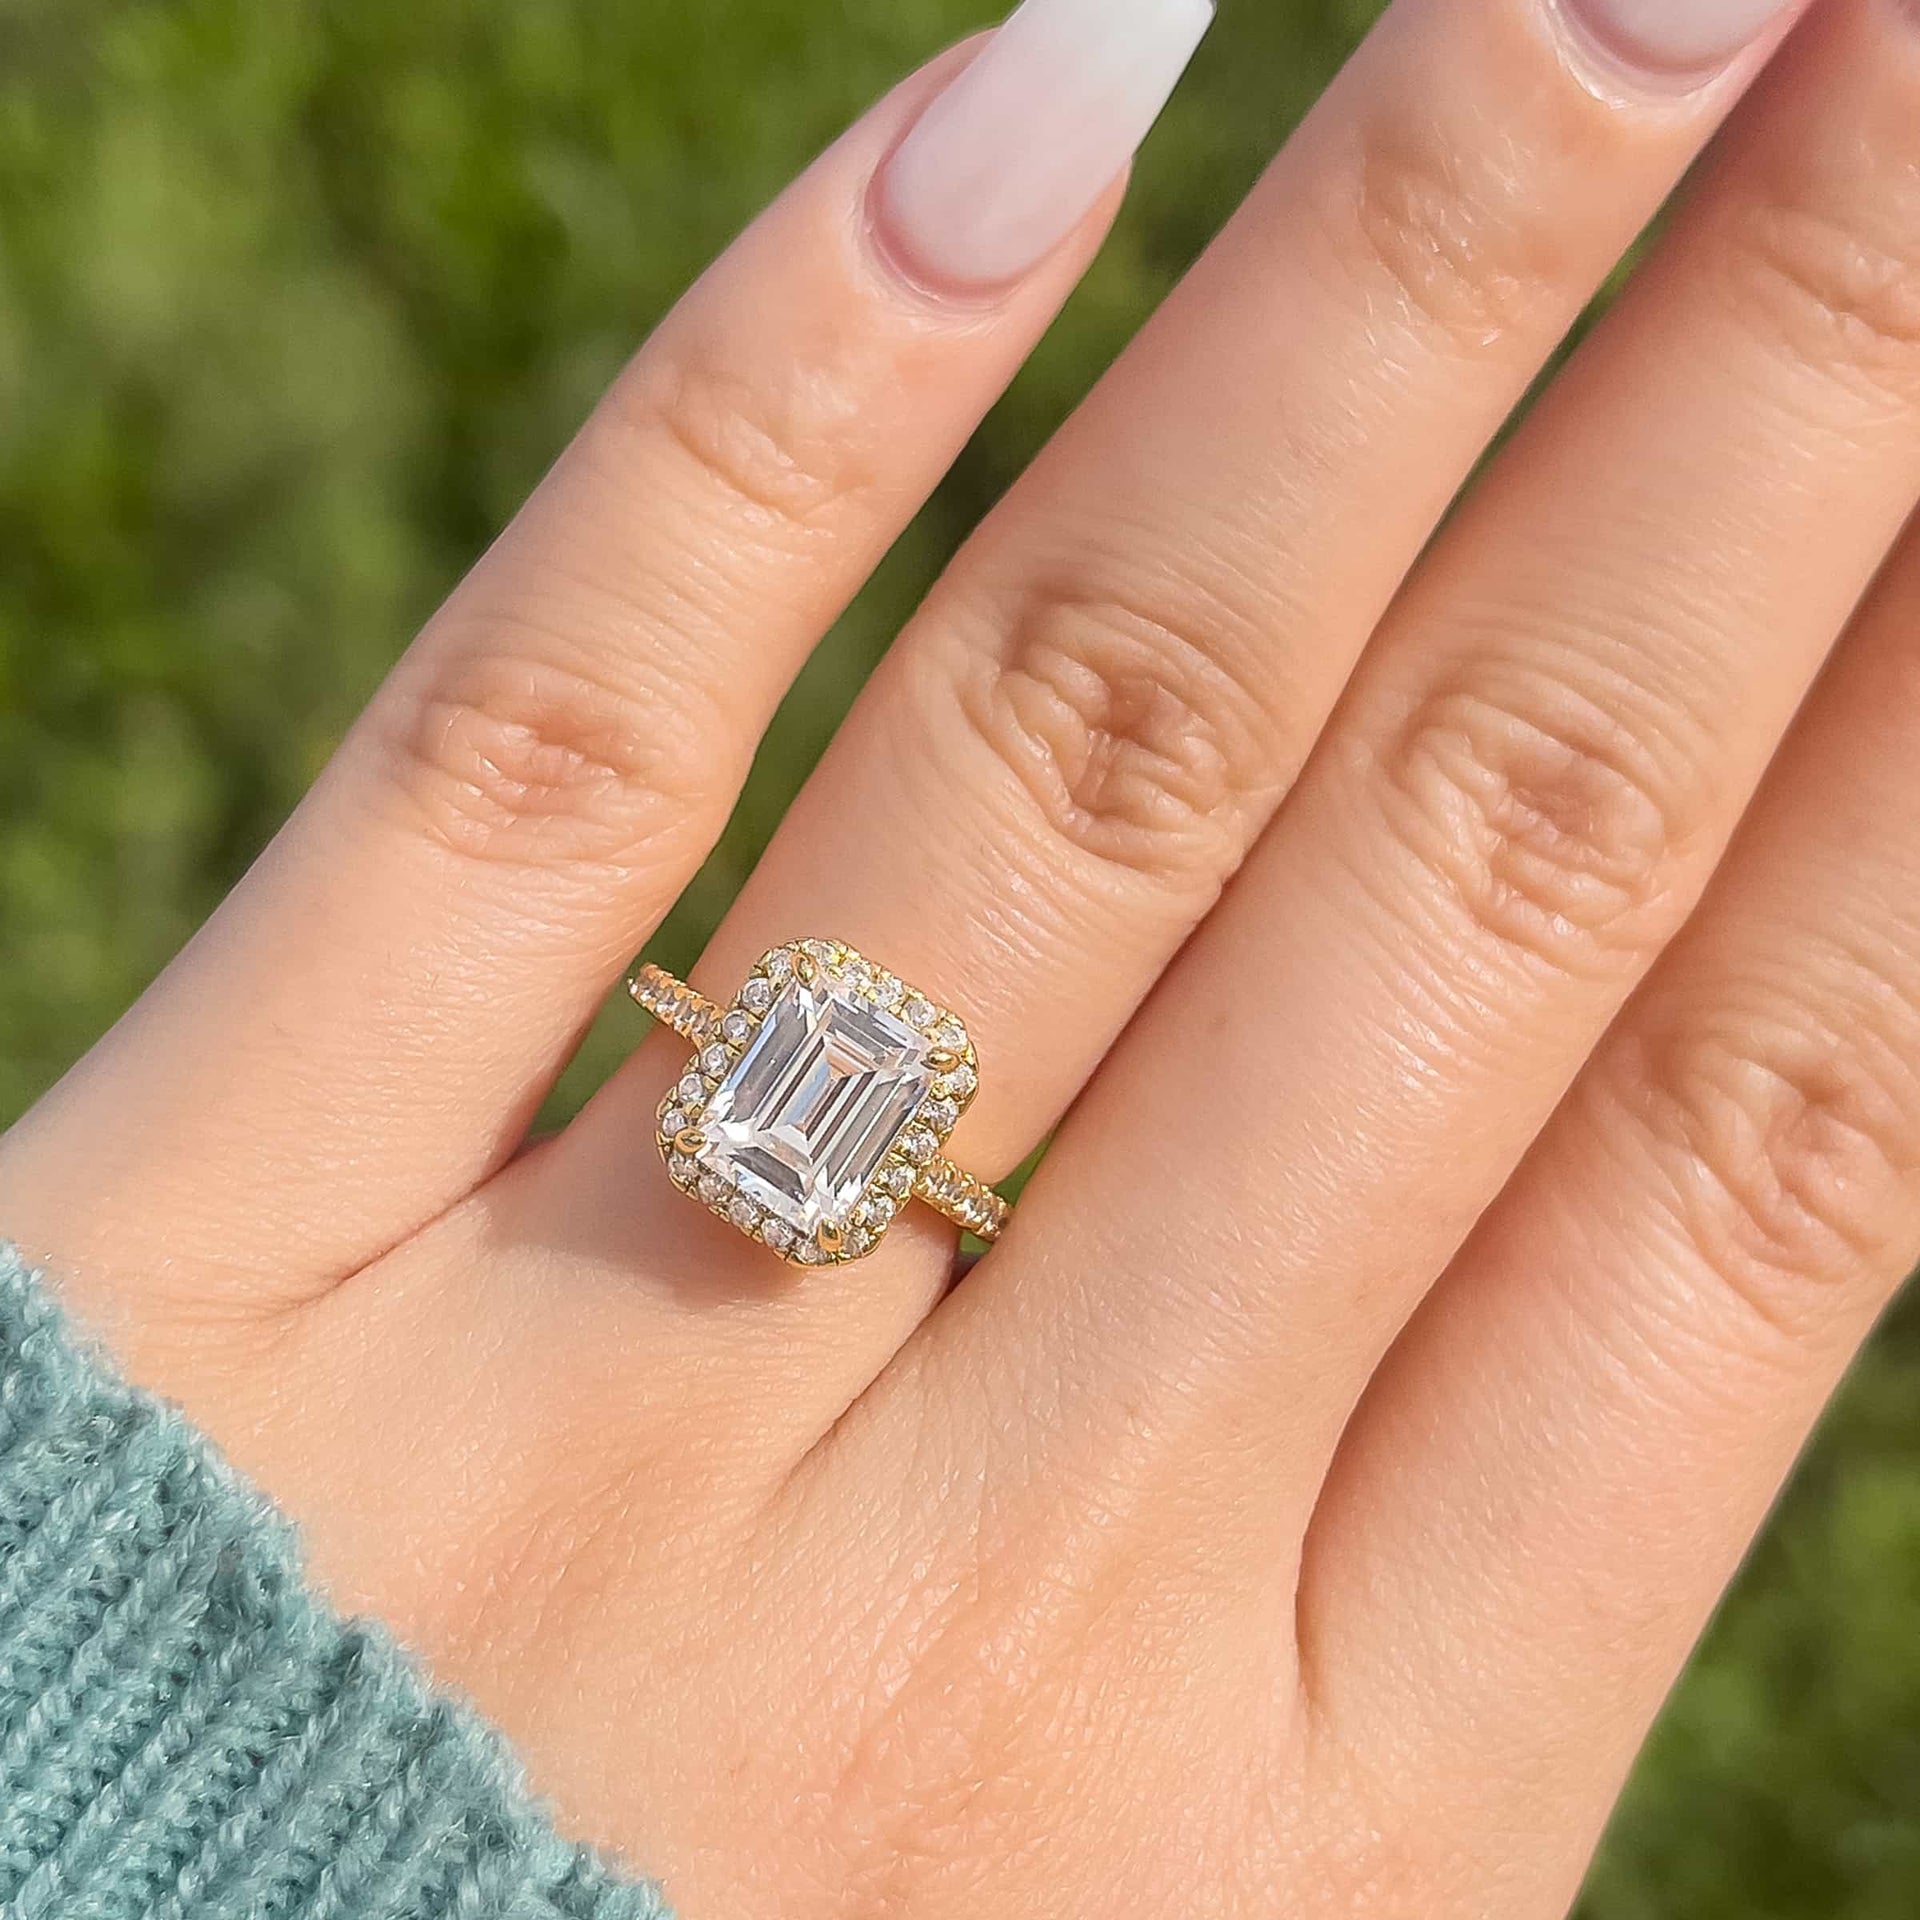 Close up of gold 3 carat emerald cut engagement ring with halo and half eternity band modeled on female hand with teal sweater